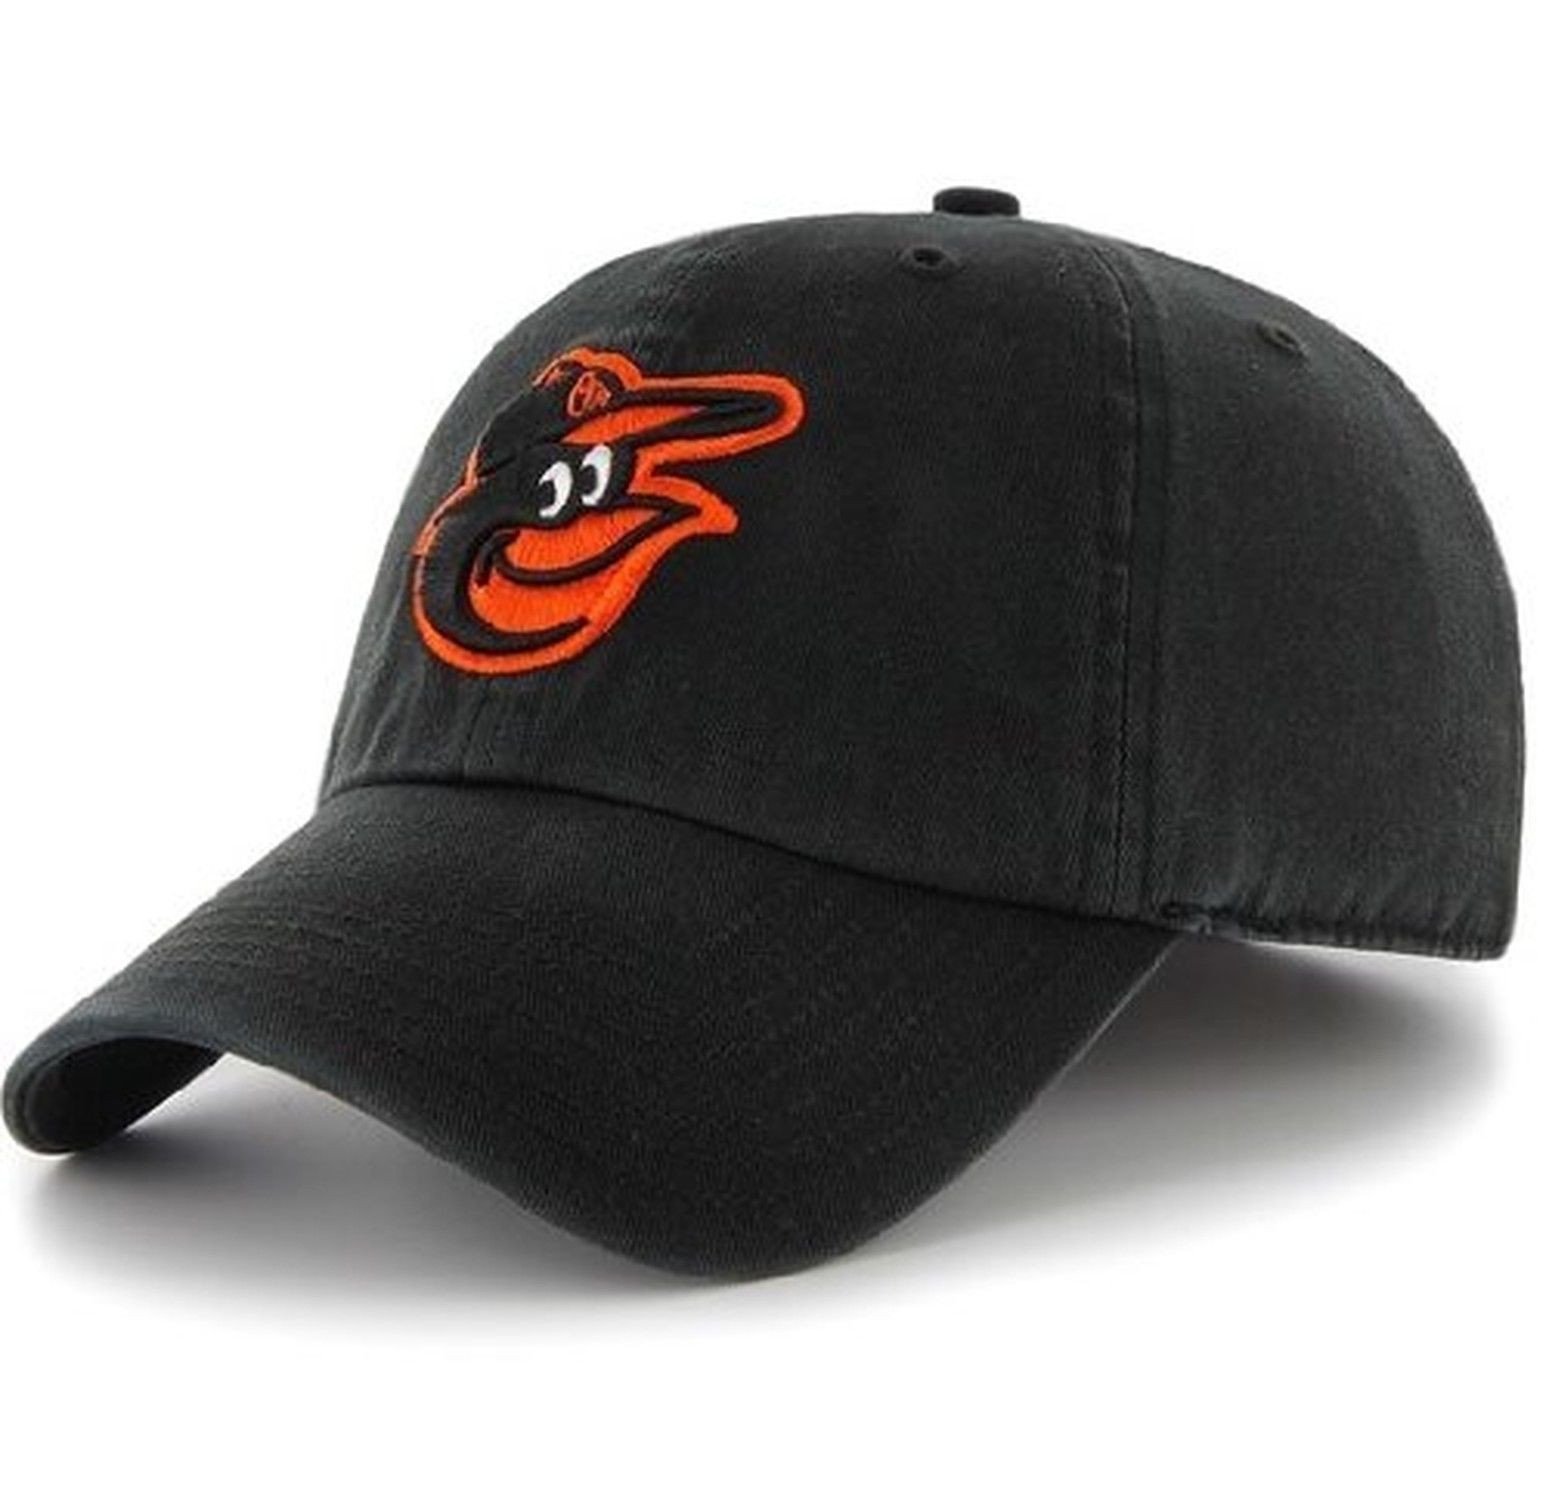 Mlb '47 Clean Up Adjustable Baseball Cap Adult Baltimore Orioles One ...